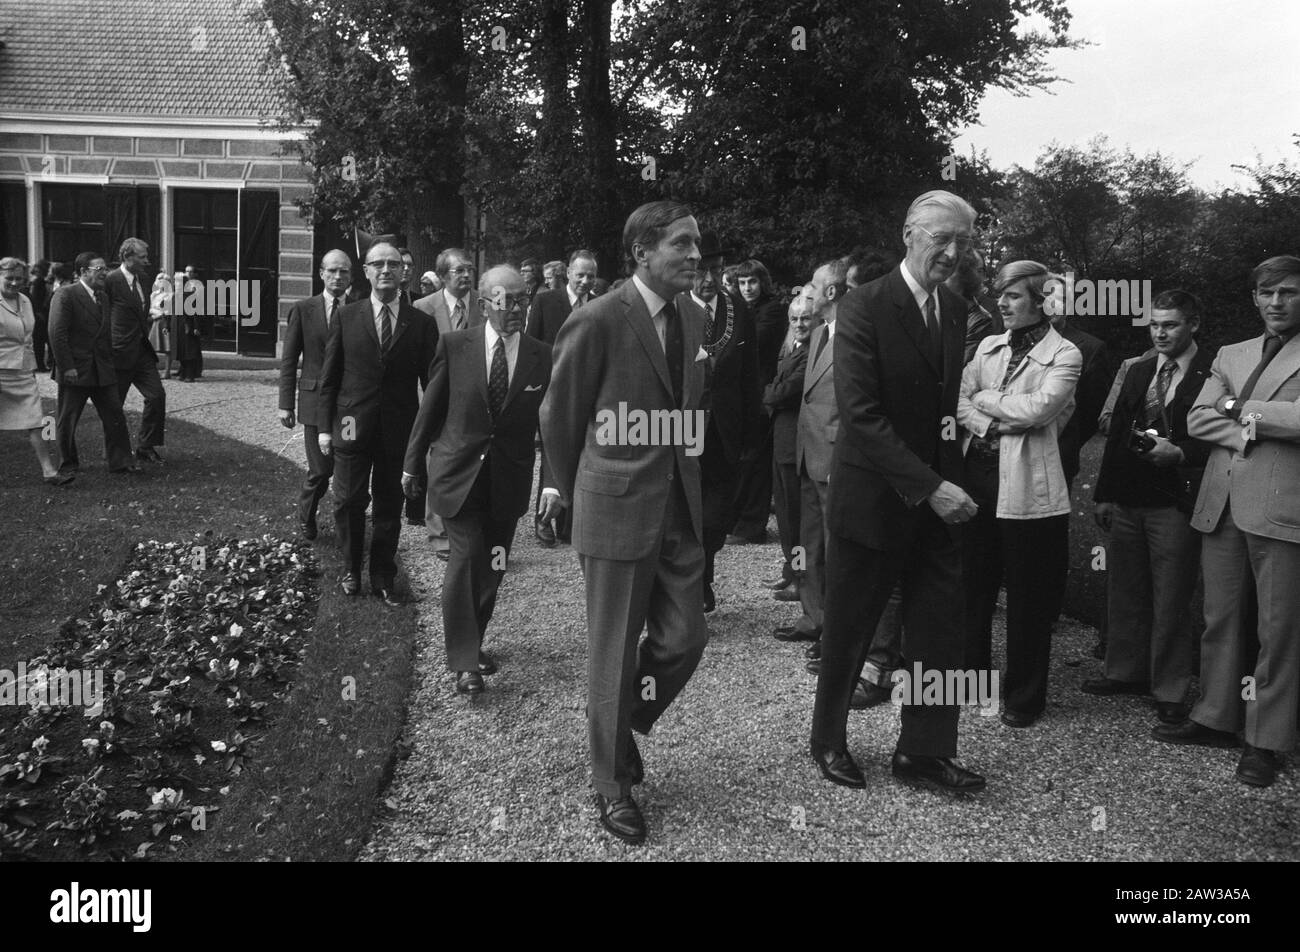 Prince Claus restored by Schaep and Burgh in s-Graveland, new home for Ned. Far. Conservation of Nature; Reception Date: October 1, 1975 Location: 's-Graveland, Noord-Holland Keywords: Revenue Person Name: Claus, prince Institution Name: Preservation of Nature Stock Photo